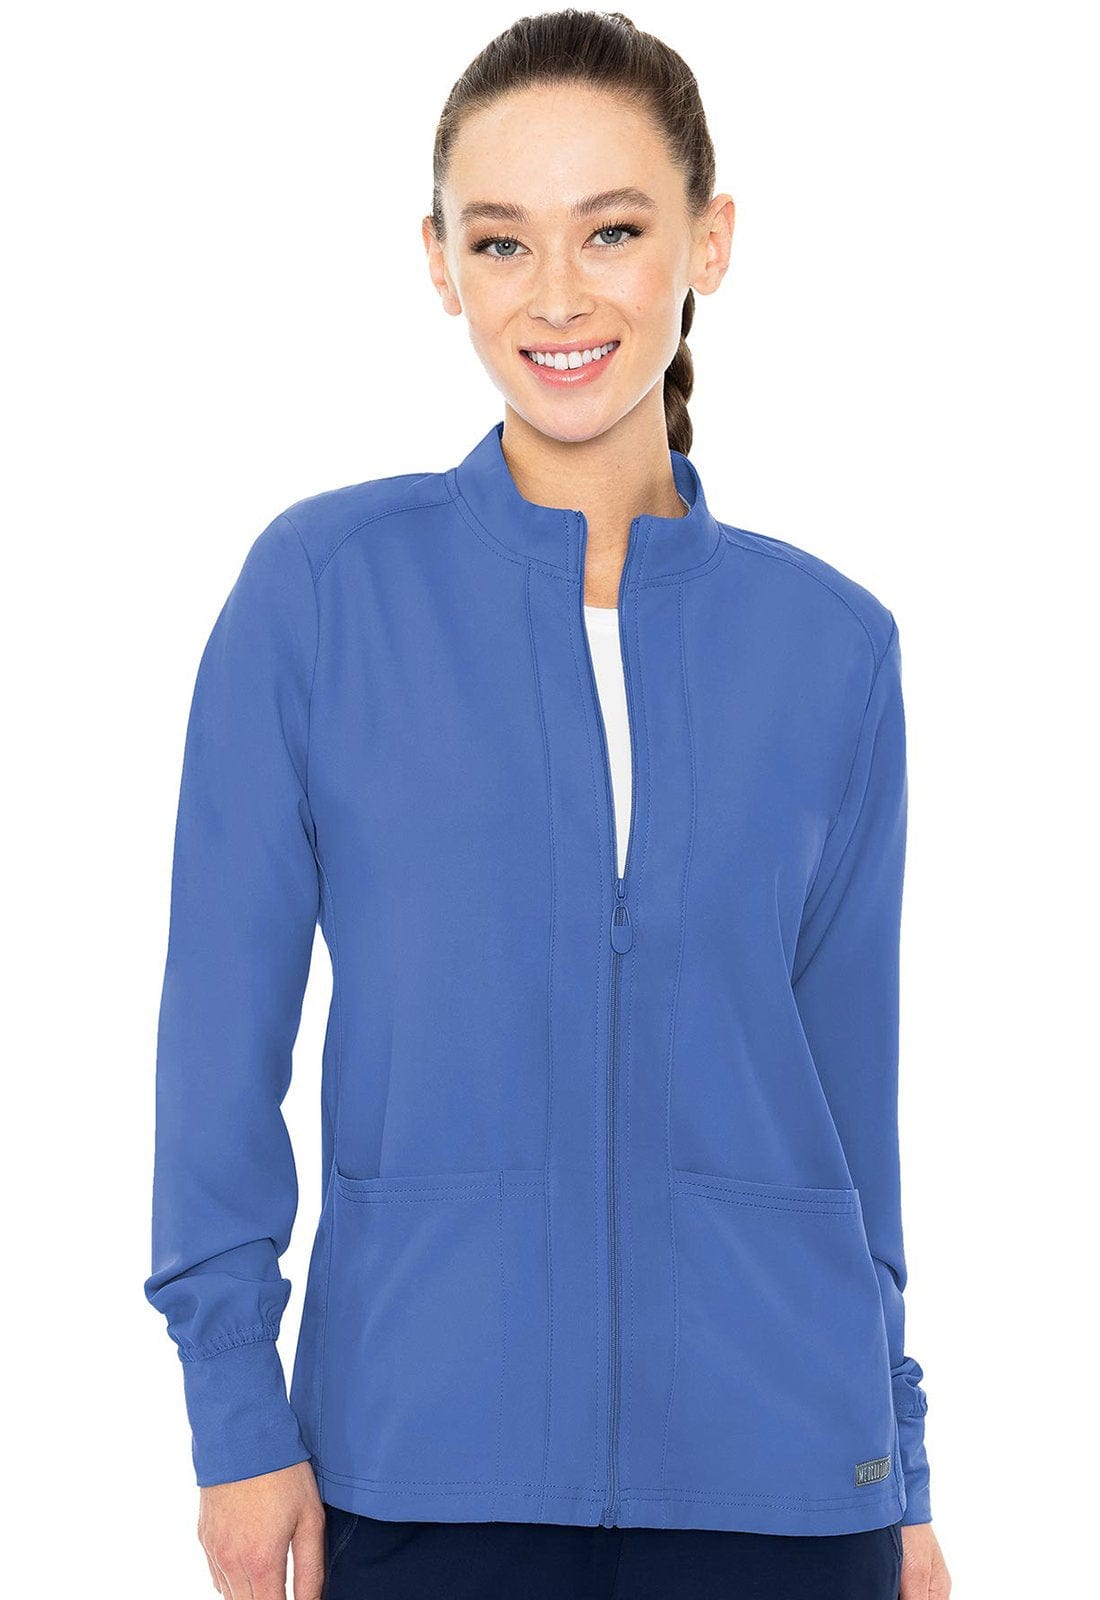 Med Couture MC Insight Ciel / 3XL MC Insight  Zip Front Warm-Up With Shoulder Yokes MC2660